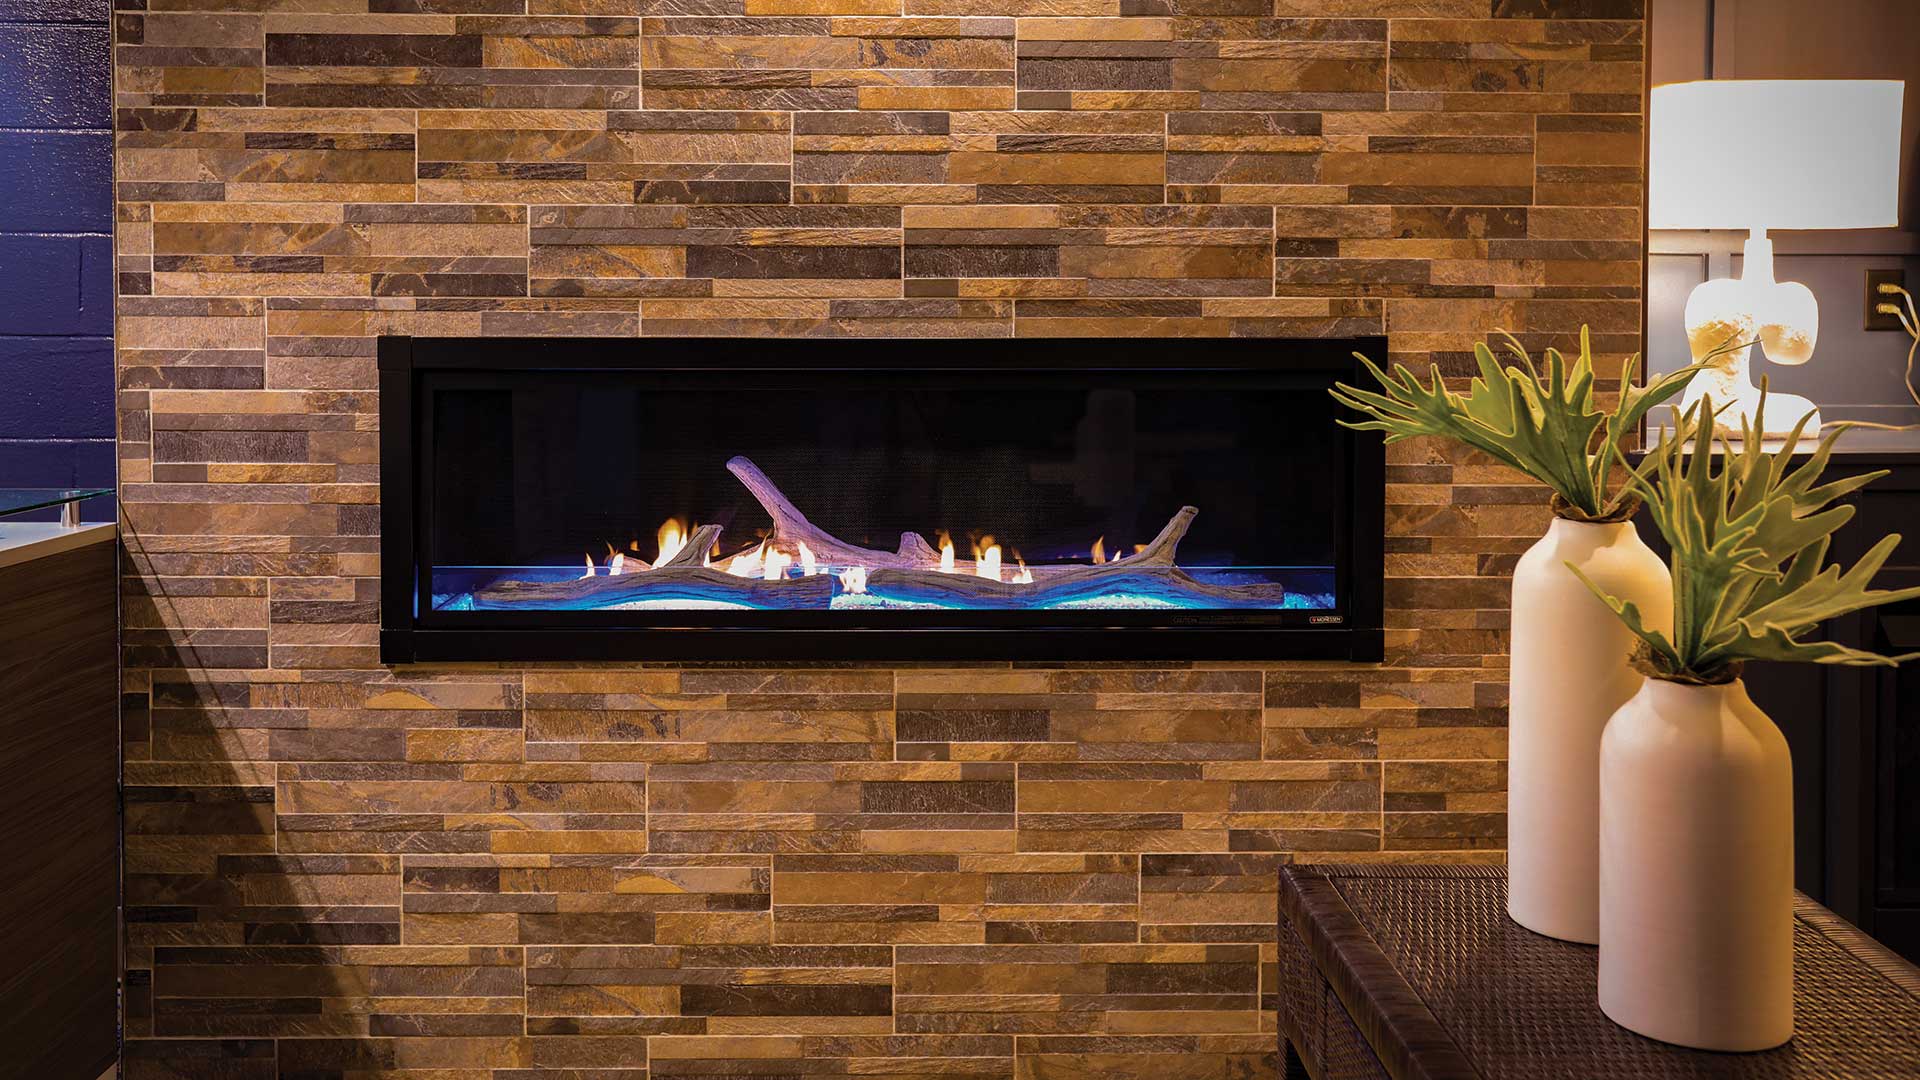 Find this sleek and modern fireplace insert at the NWP Showroom.